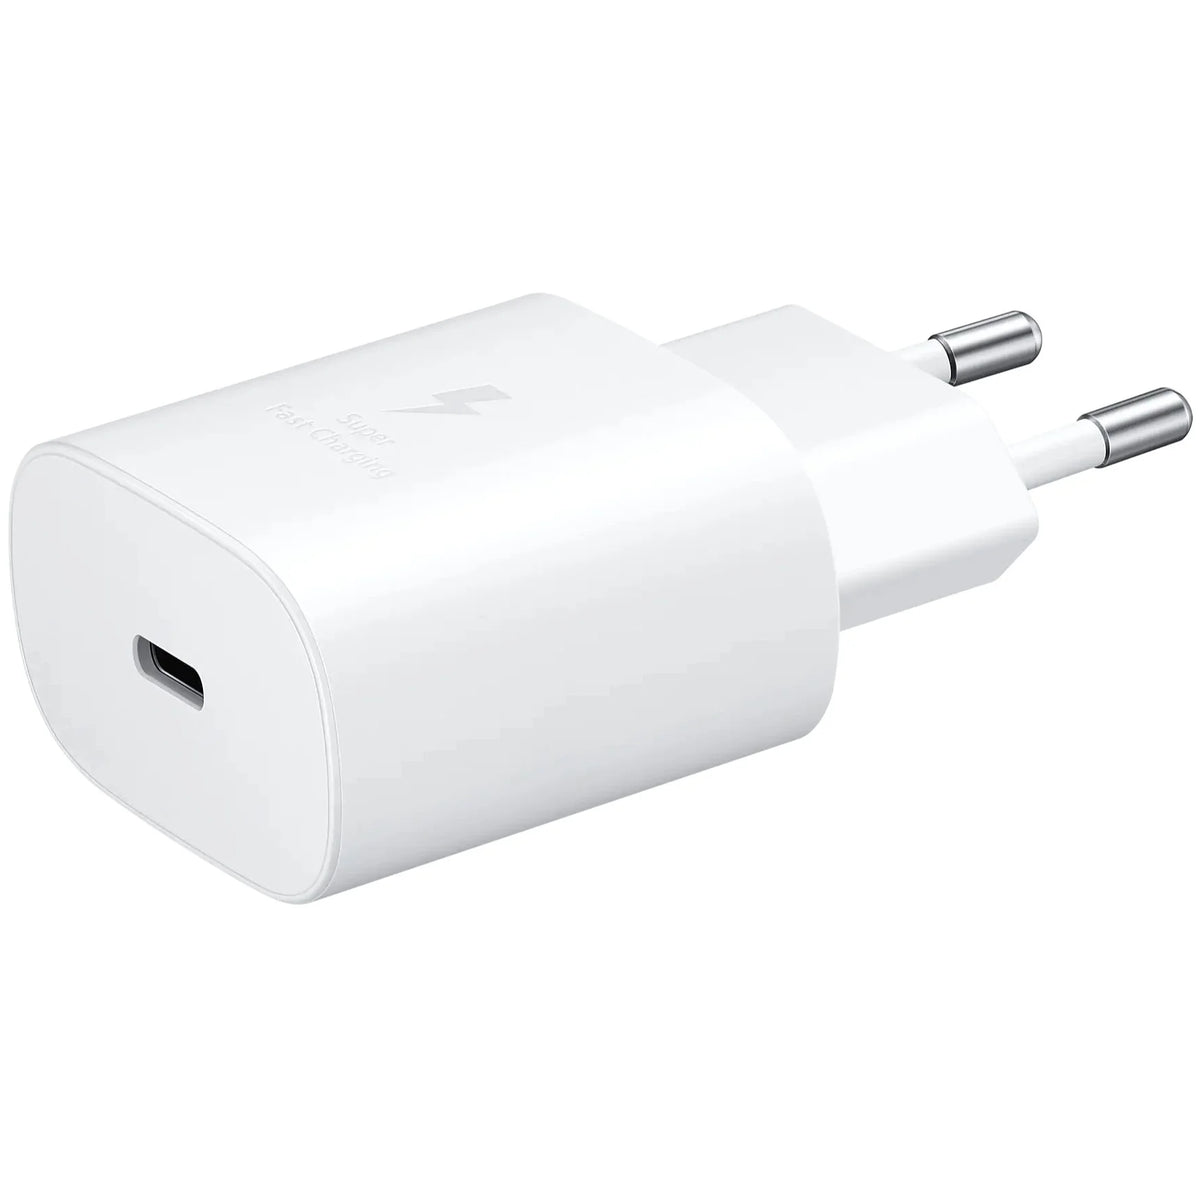 Samsung 25W 2-Pin Power Adapter Without Cable White